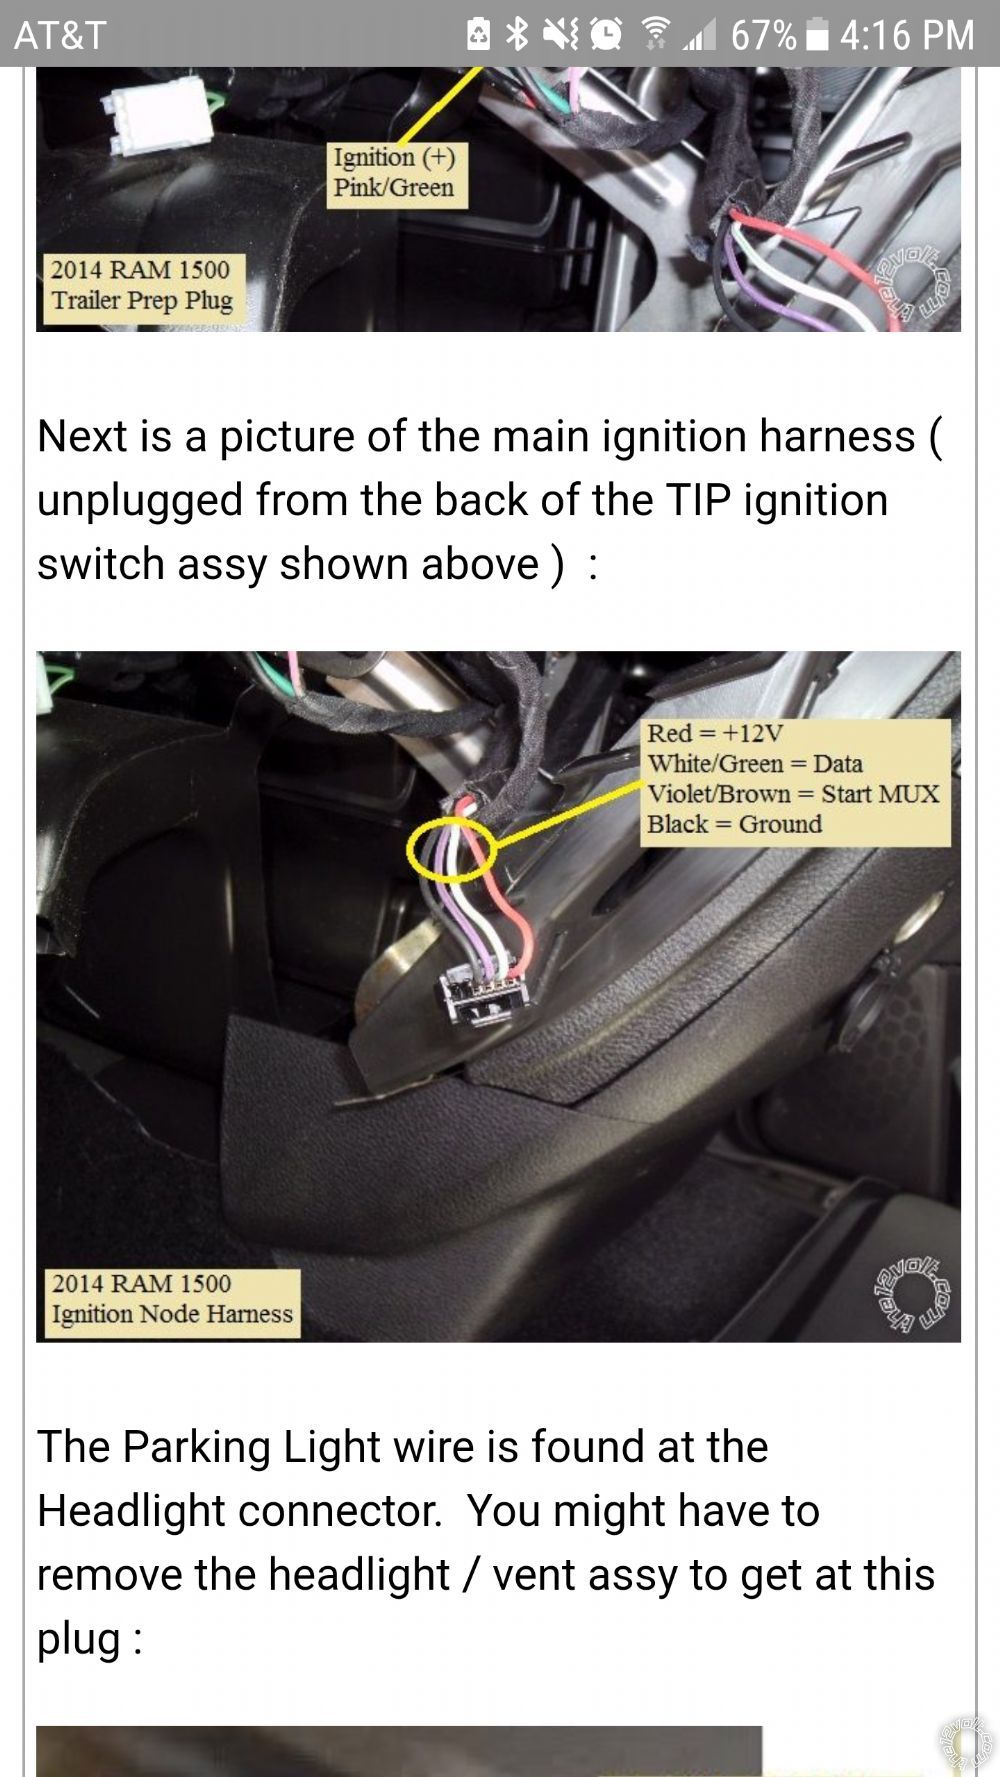 2016 Ram - Horn Wire - Last Post -- posted image.